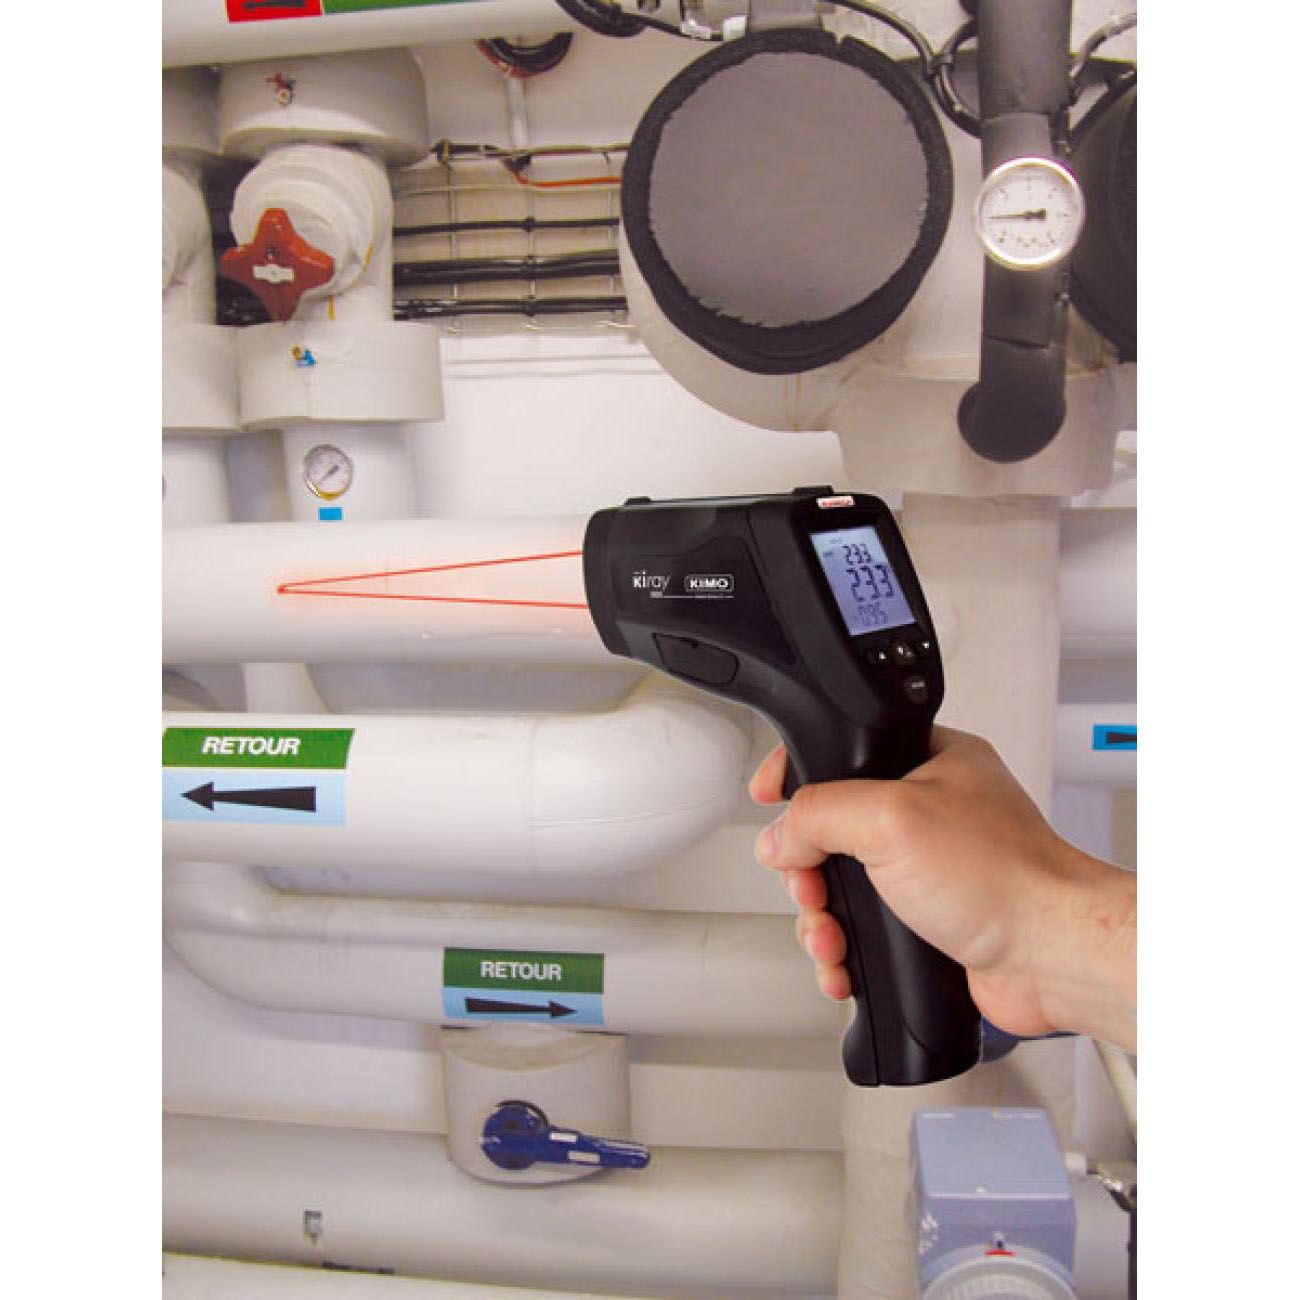 KIRAY 300 Infrared thermometer